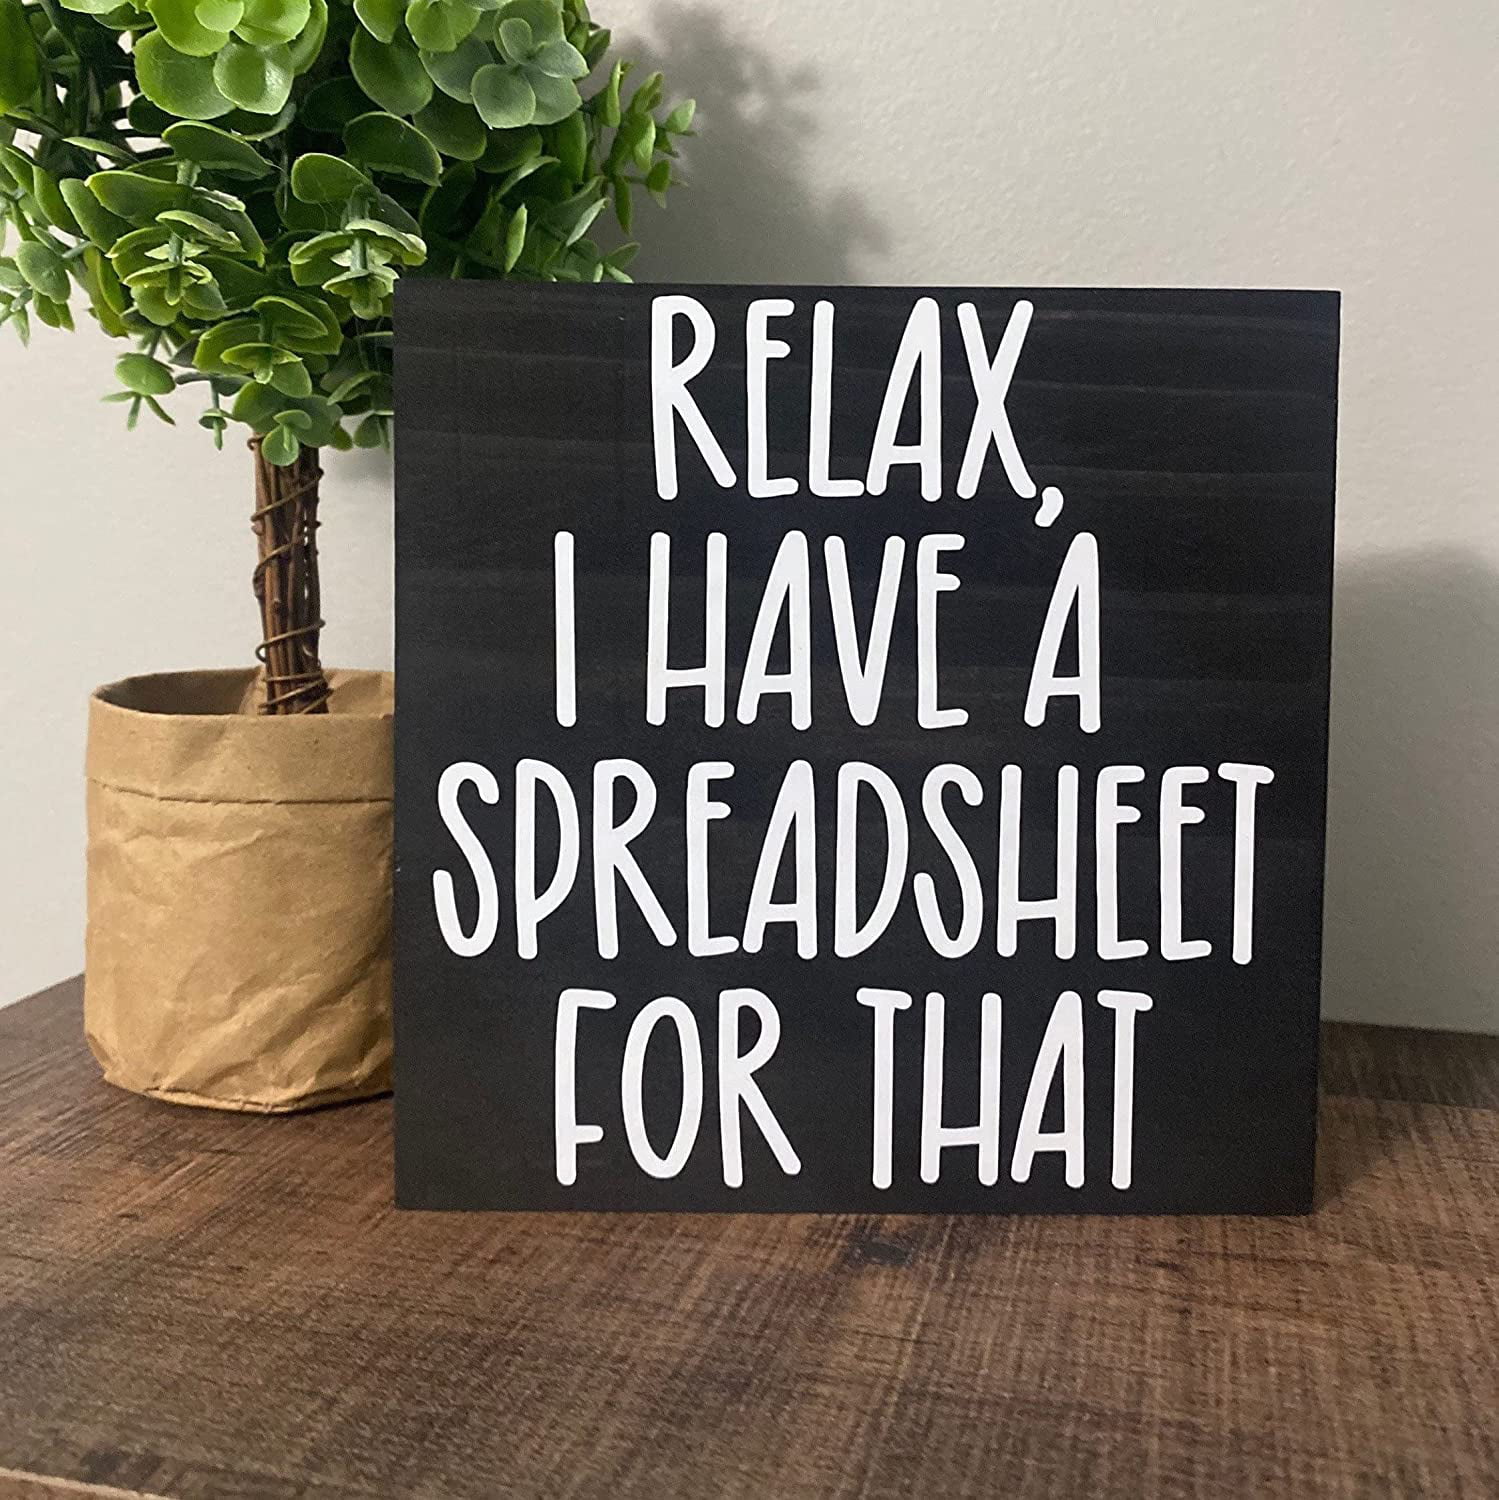 Relax I Have A Spreadsheet / Wood Signs / Office Decor / Funny Office Humor  / Desk Signs / Work Humor / Wood Signs / Fun Rustic Wood Signs / 10X10  Inches 